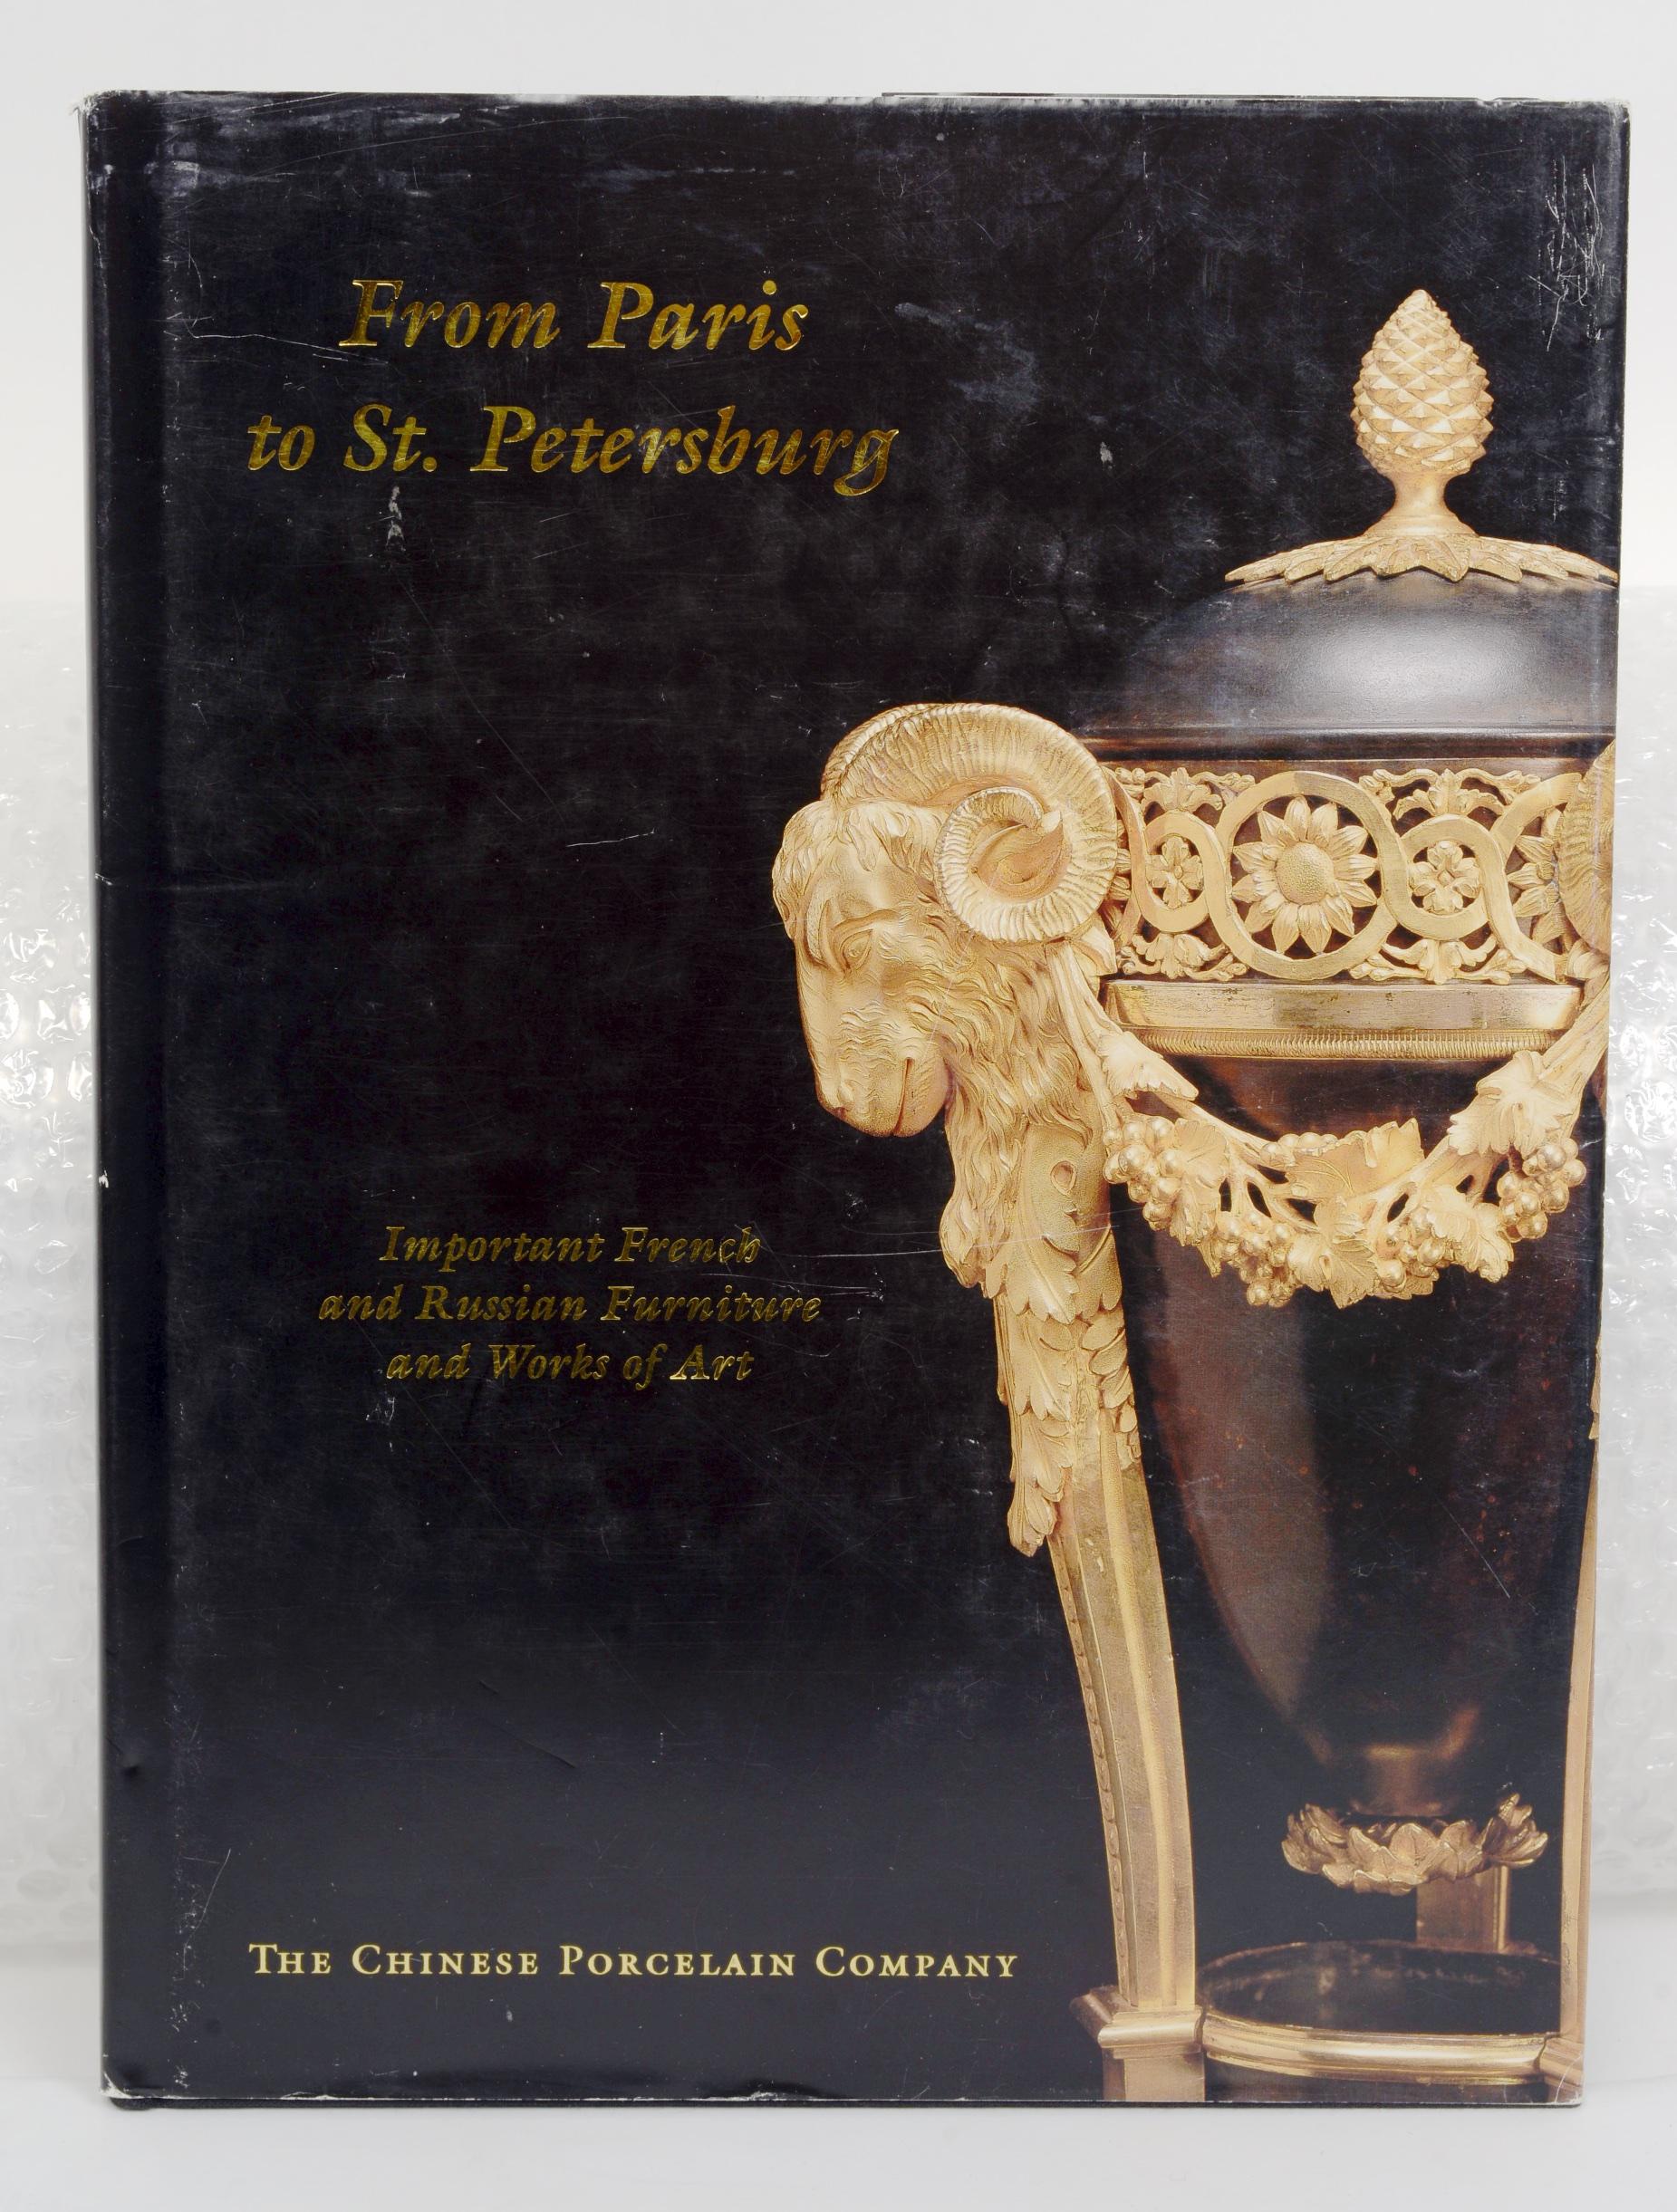 Four Catalogues of Continental Antiques from the Chinese Porcelain Company. 1.). First Edition from Paris to St. Petersburg, Important French and Russian Furniture and Works of Art. New York: The Chinese Porcelain Company, 1998. Hardcover with dust